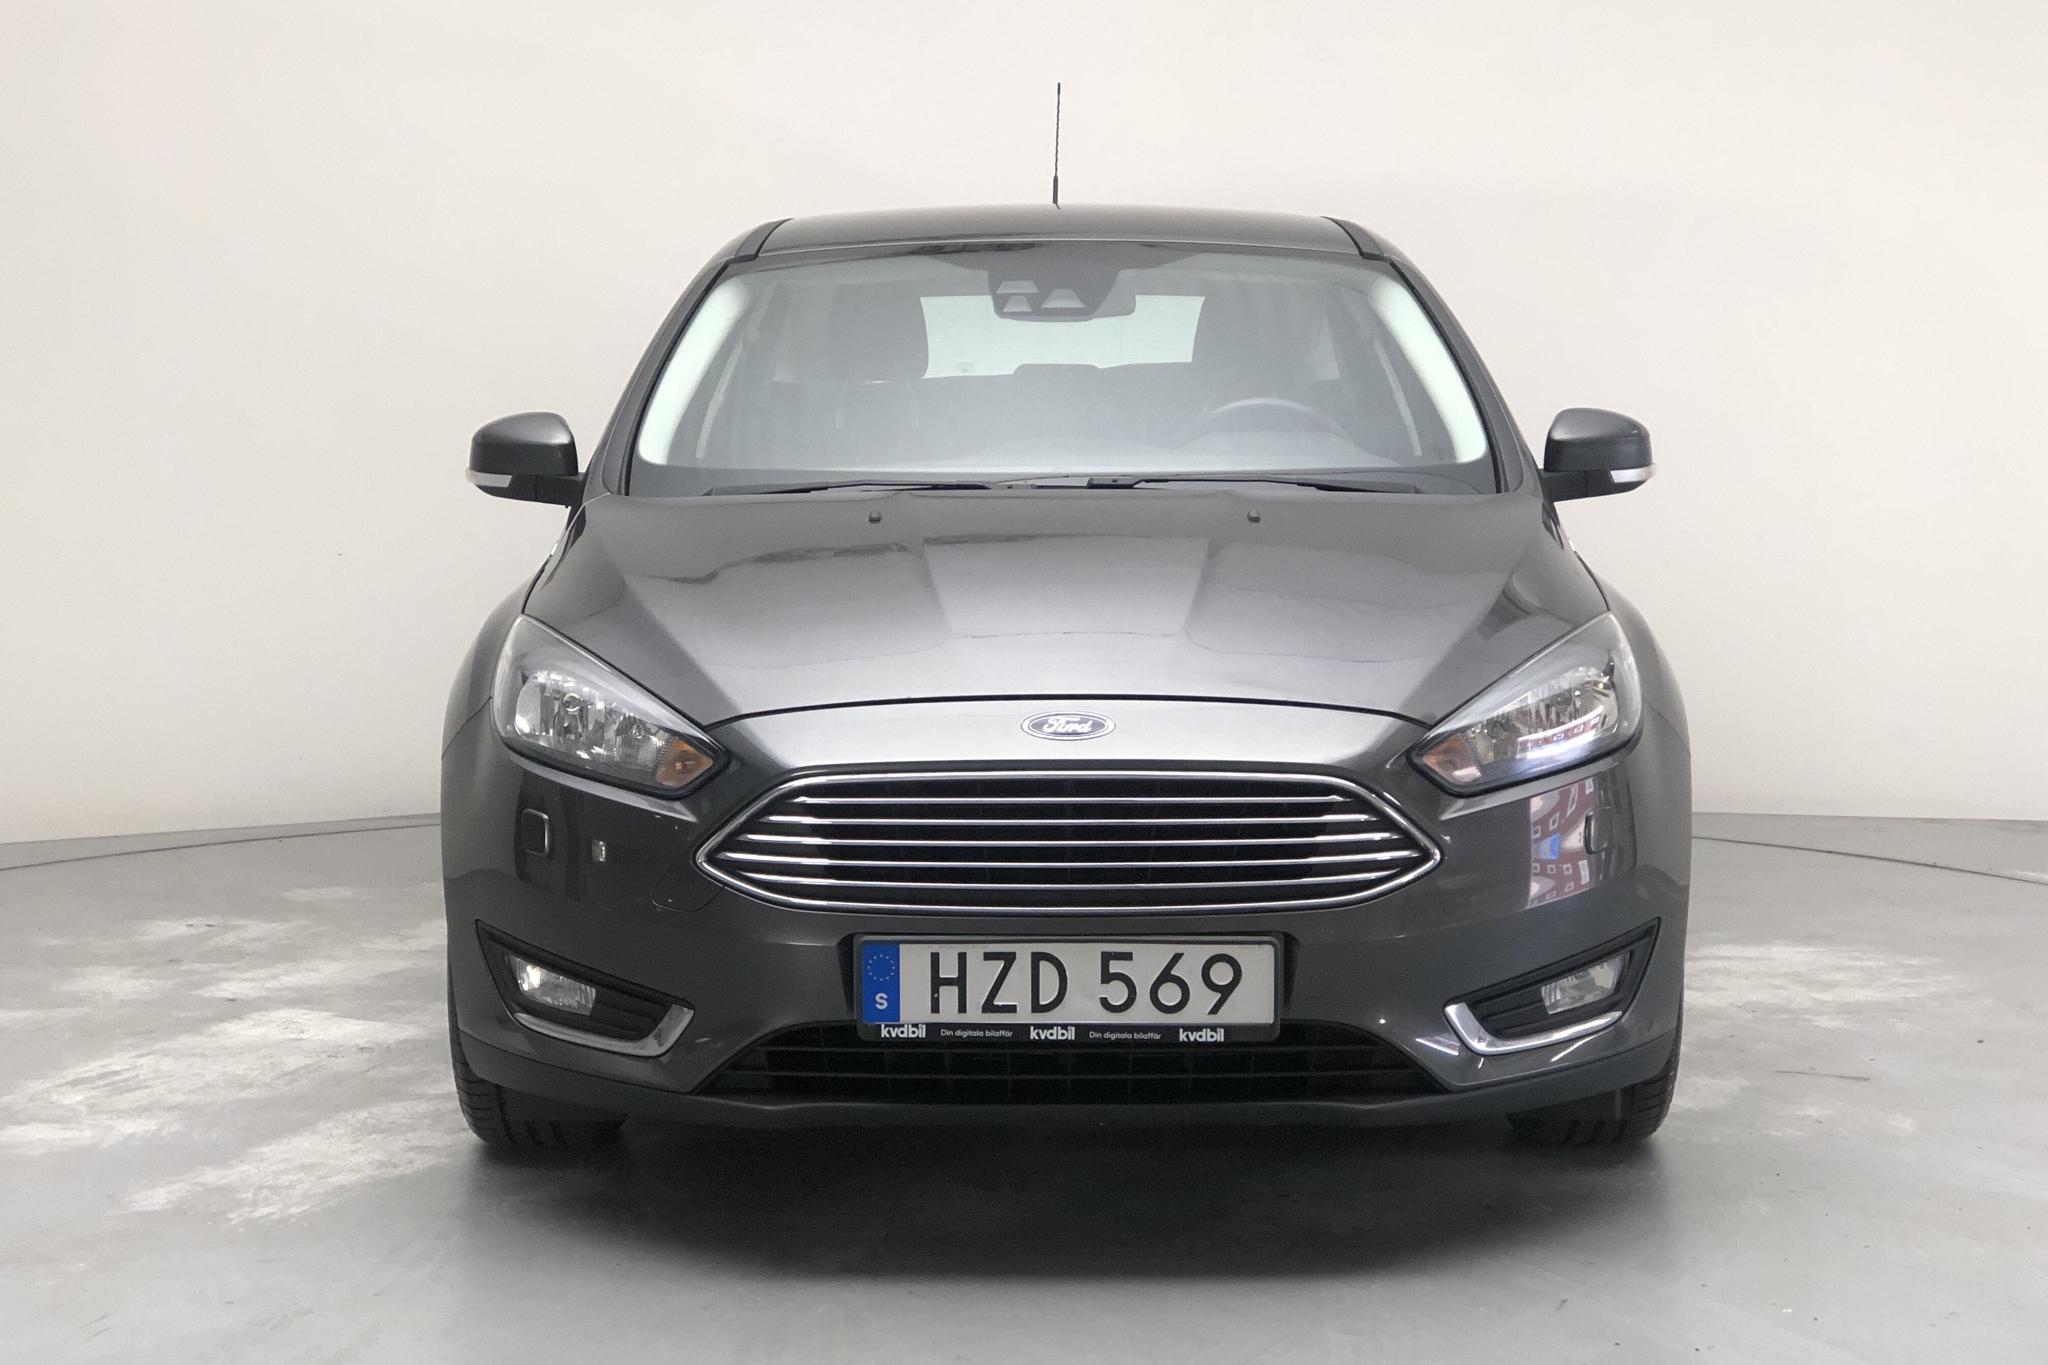 Ford Focus 1.0 EcoBoost 5dr (100hk) - 103 810 km - Manual - gray - 2016